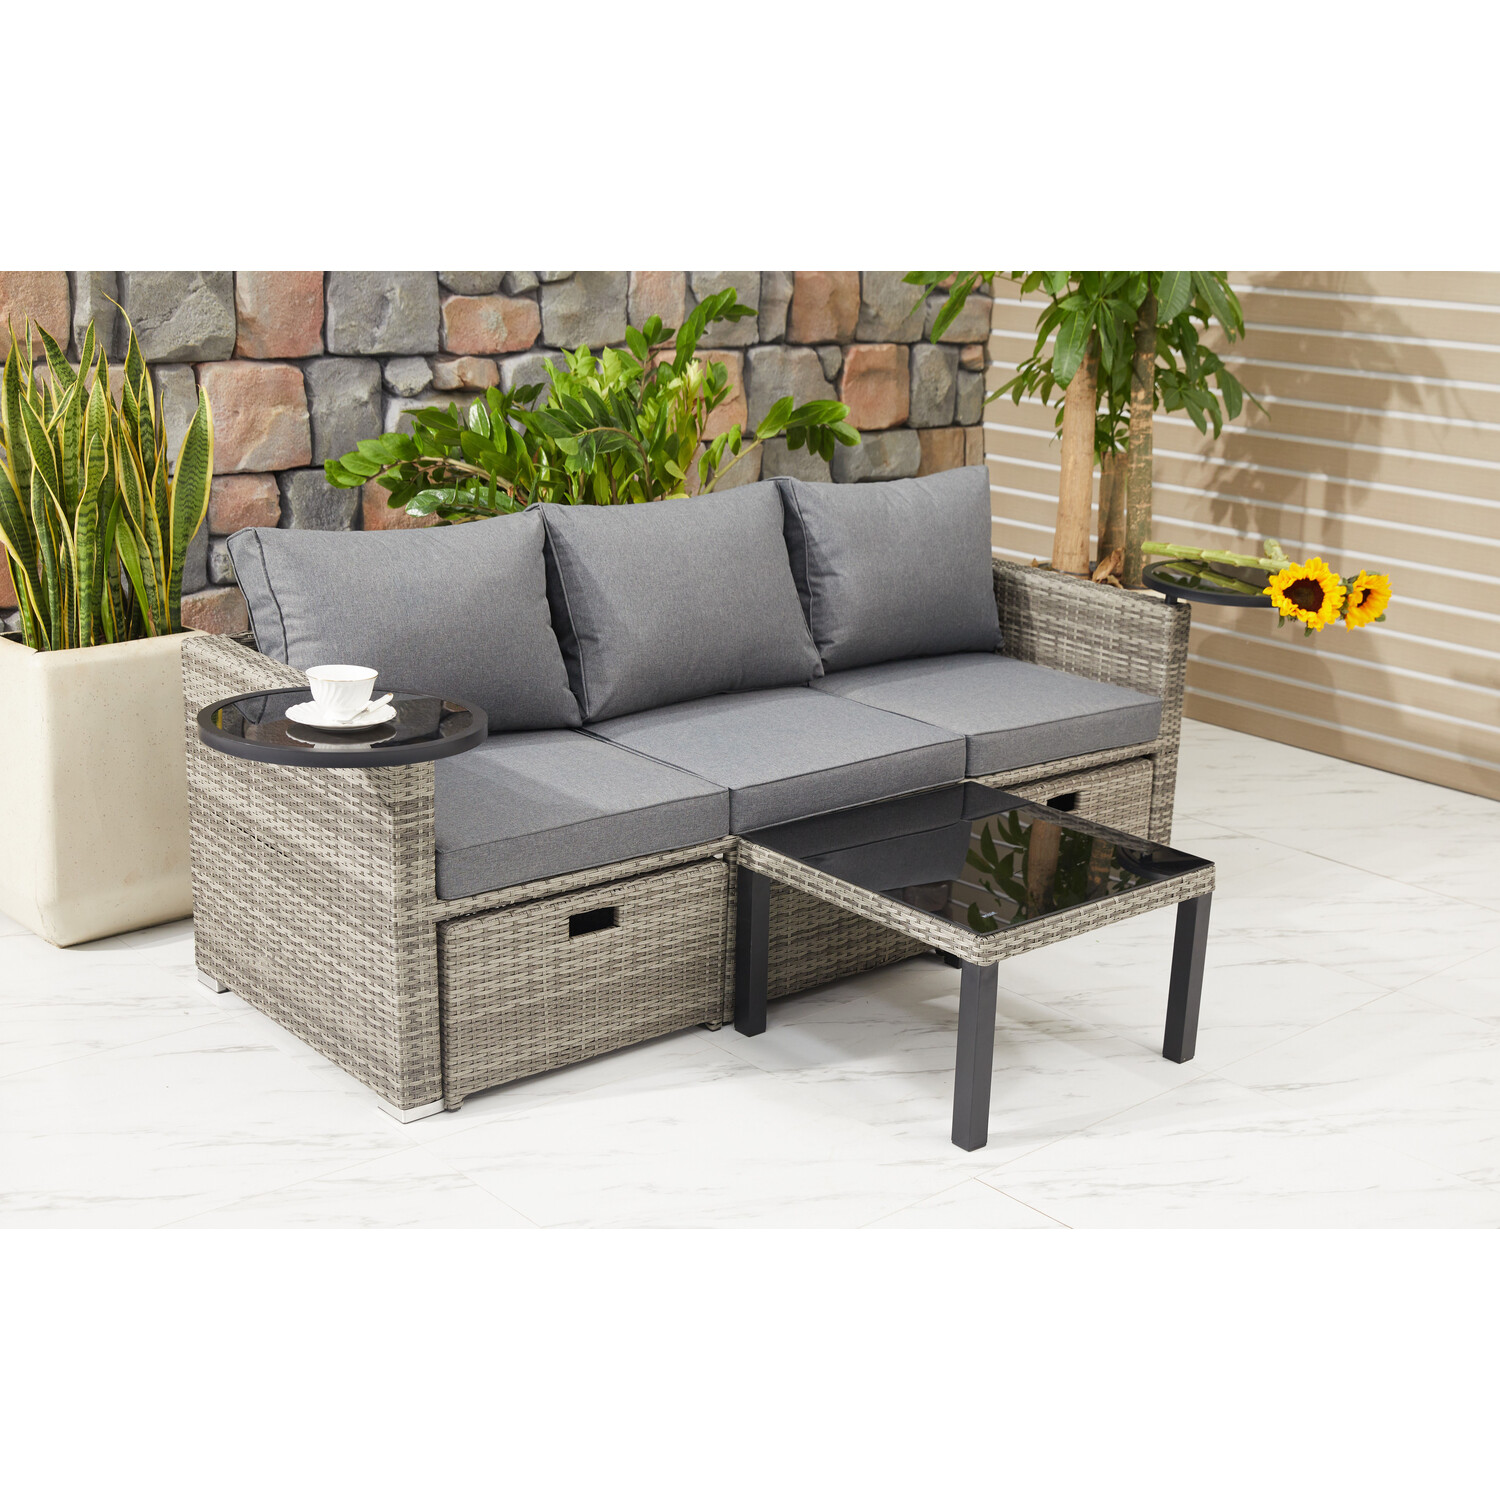 Malay Deluxe Malay New Hampshire 2 Seater Natural Transformer Patio Set Image 10